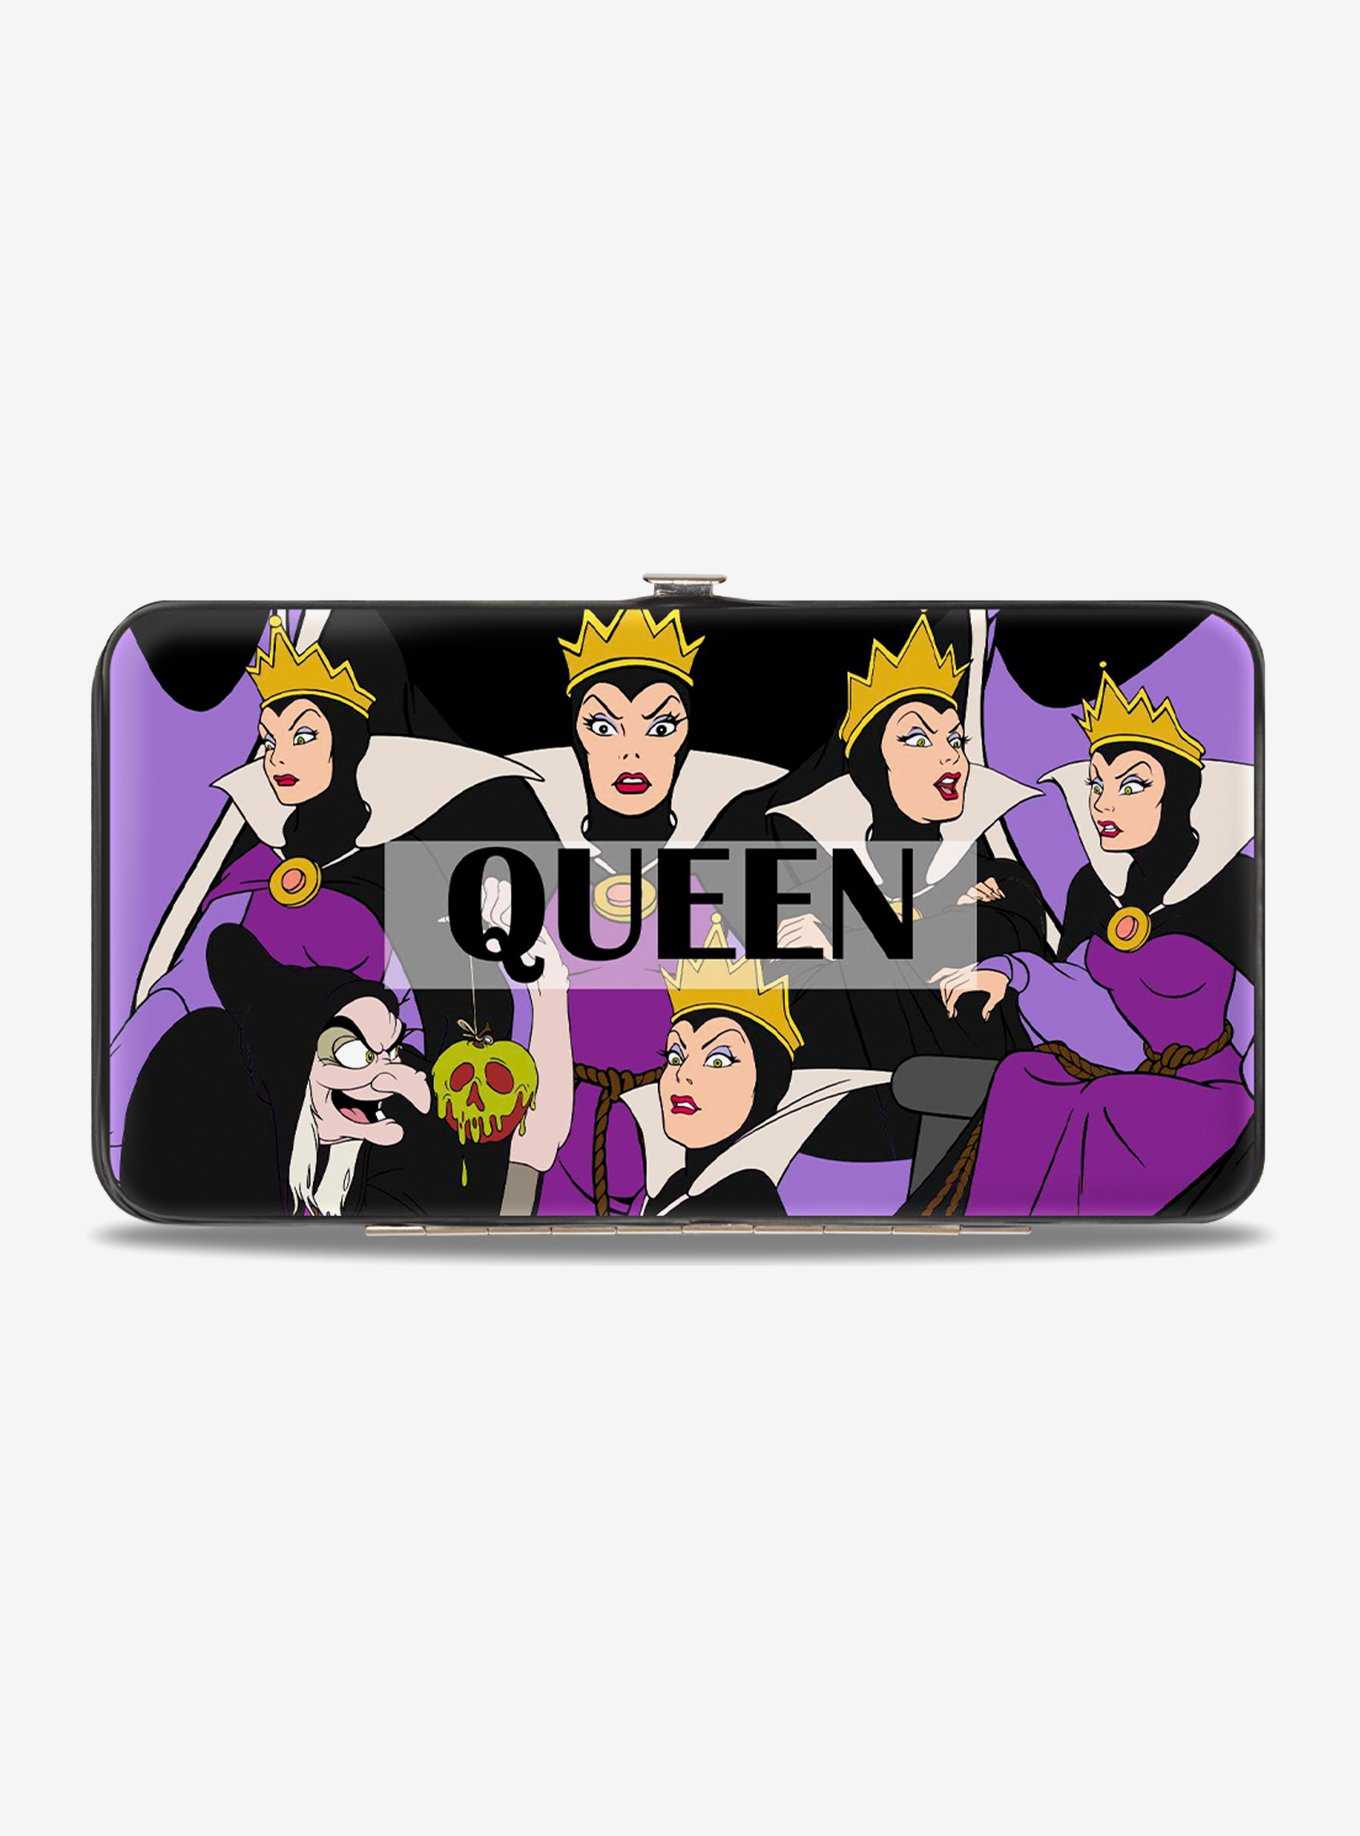 Disney Snow Whites Evil Queen Poses Collage Hinged Wallet, , hi-res